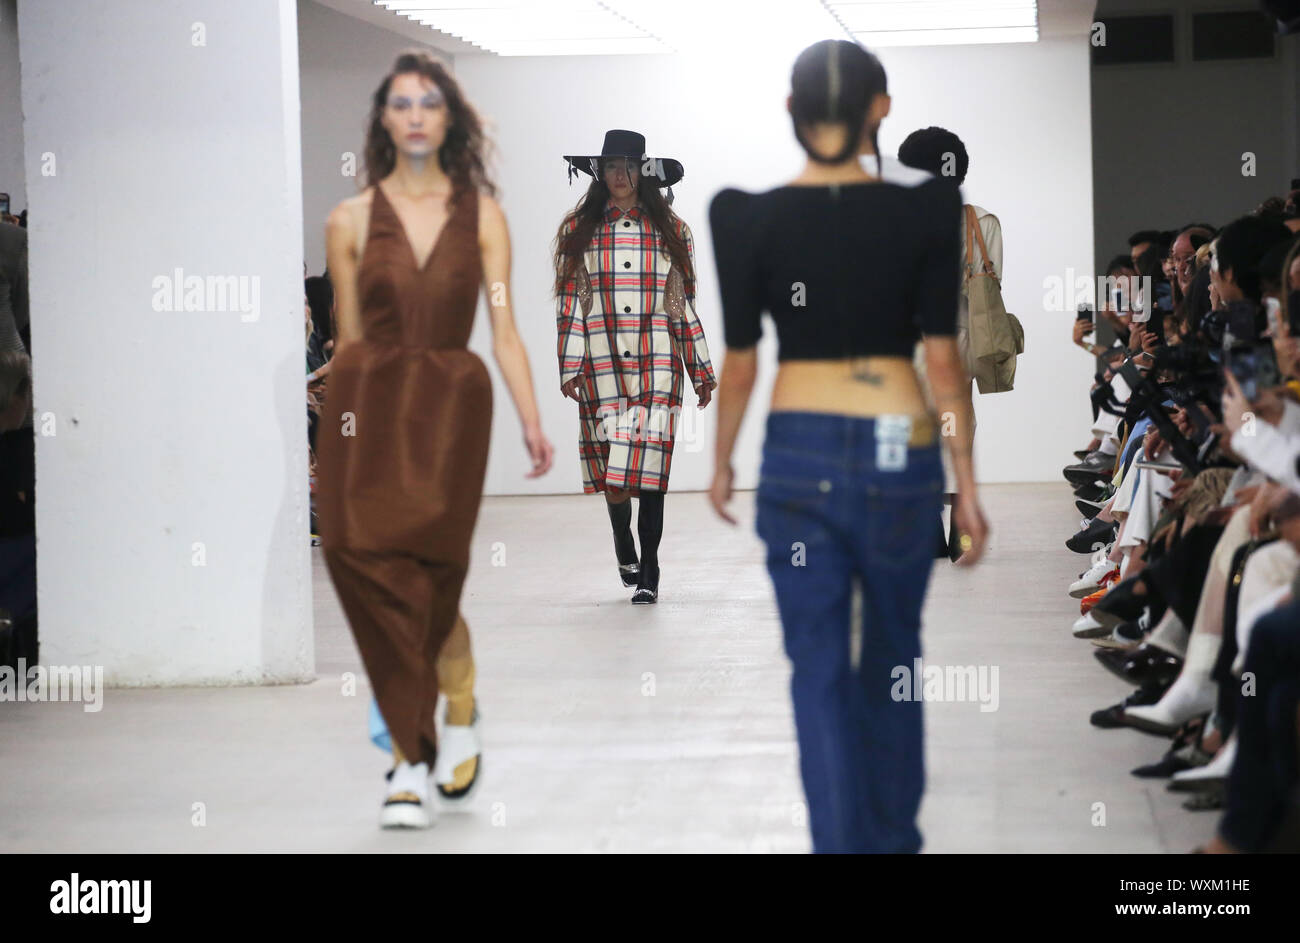 Models on the catwalk of pushBUTTON Spring/Summer 2020 London Fashion Week show at the BFC Show Space, London. Stock Photo